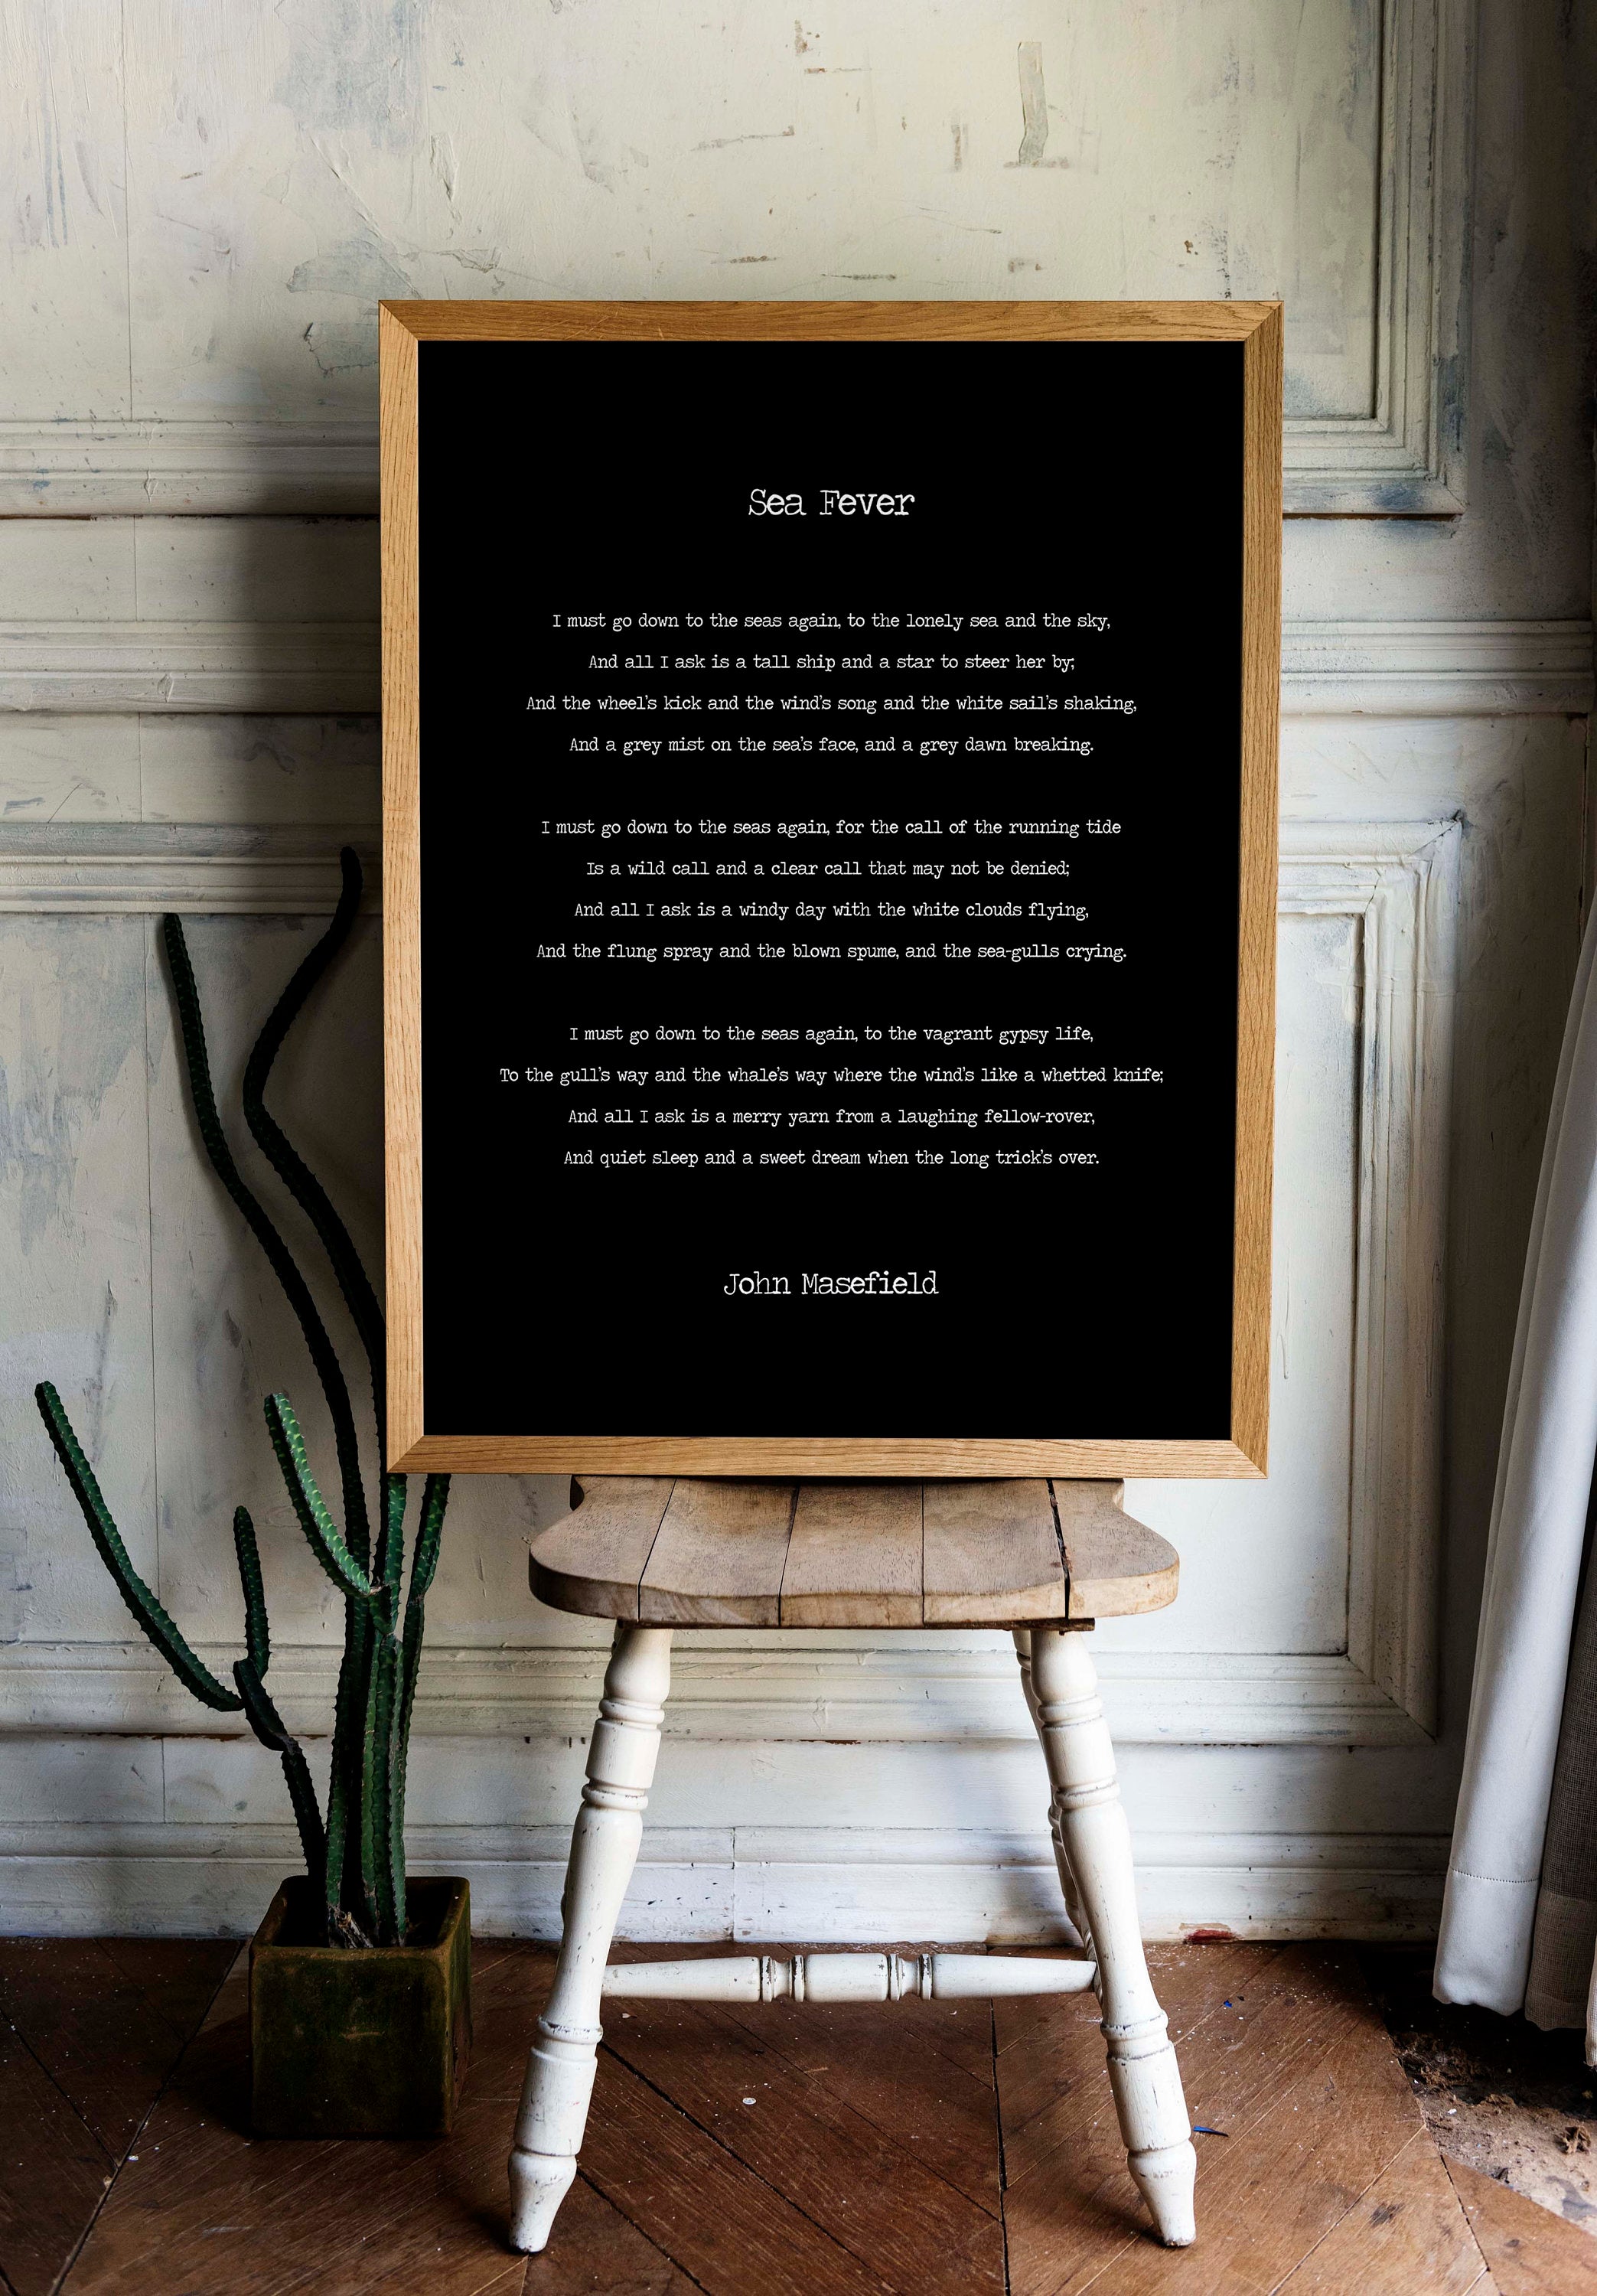 Sea Fever Poem by John Masefield, I Must Go Down To The Seas Again Poetry Art Print, Literary Print Unframed Black & White - BookQuoteDecor